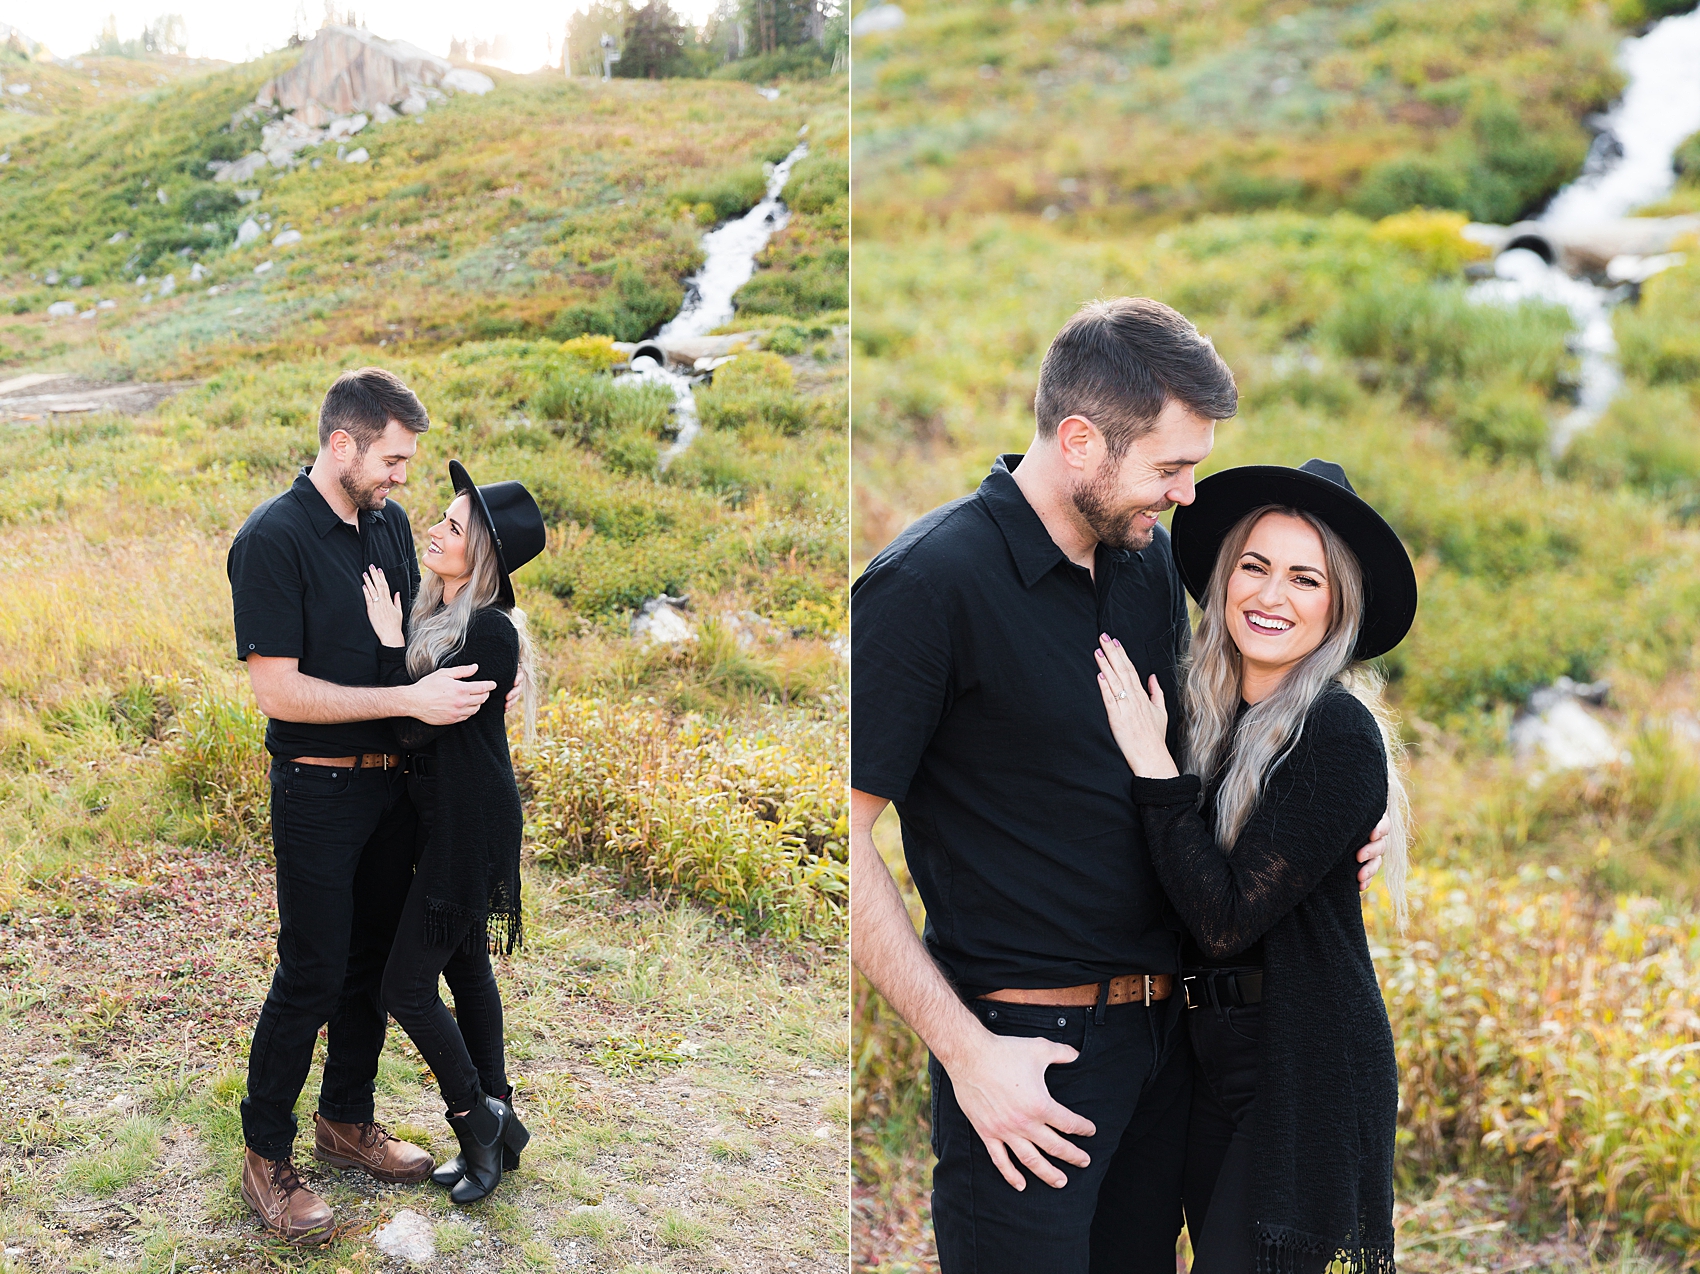 Leah Hope Photography | Salt Lake City Utah | Canyon Greenery Mountains | Family Pictures | What to Wear | Family Poses | Children